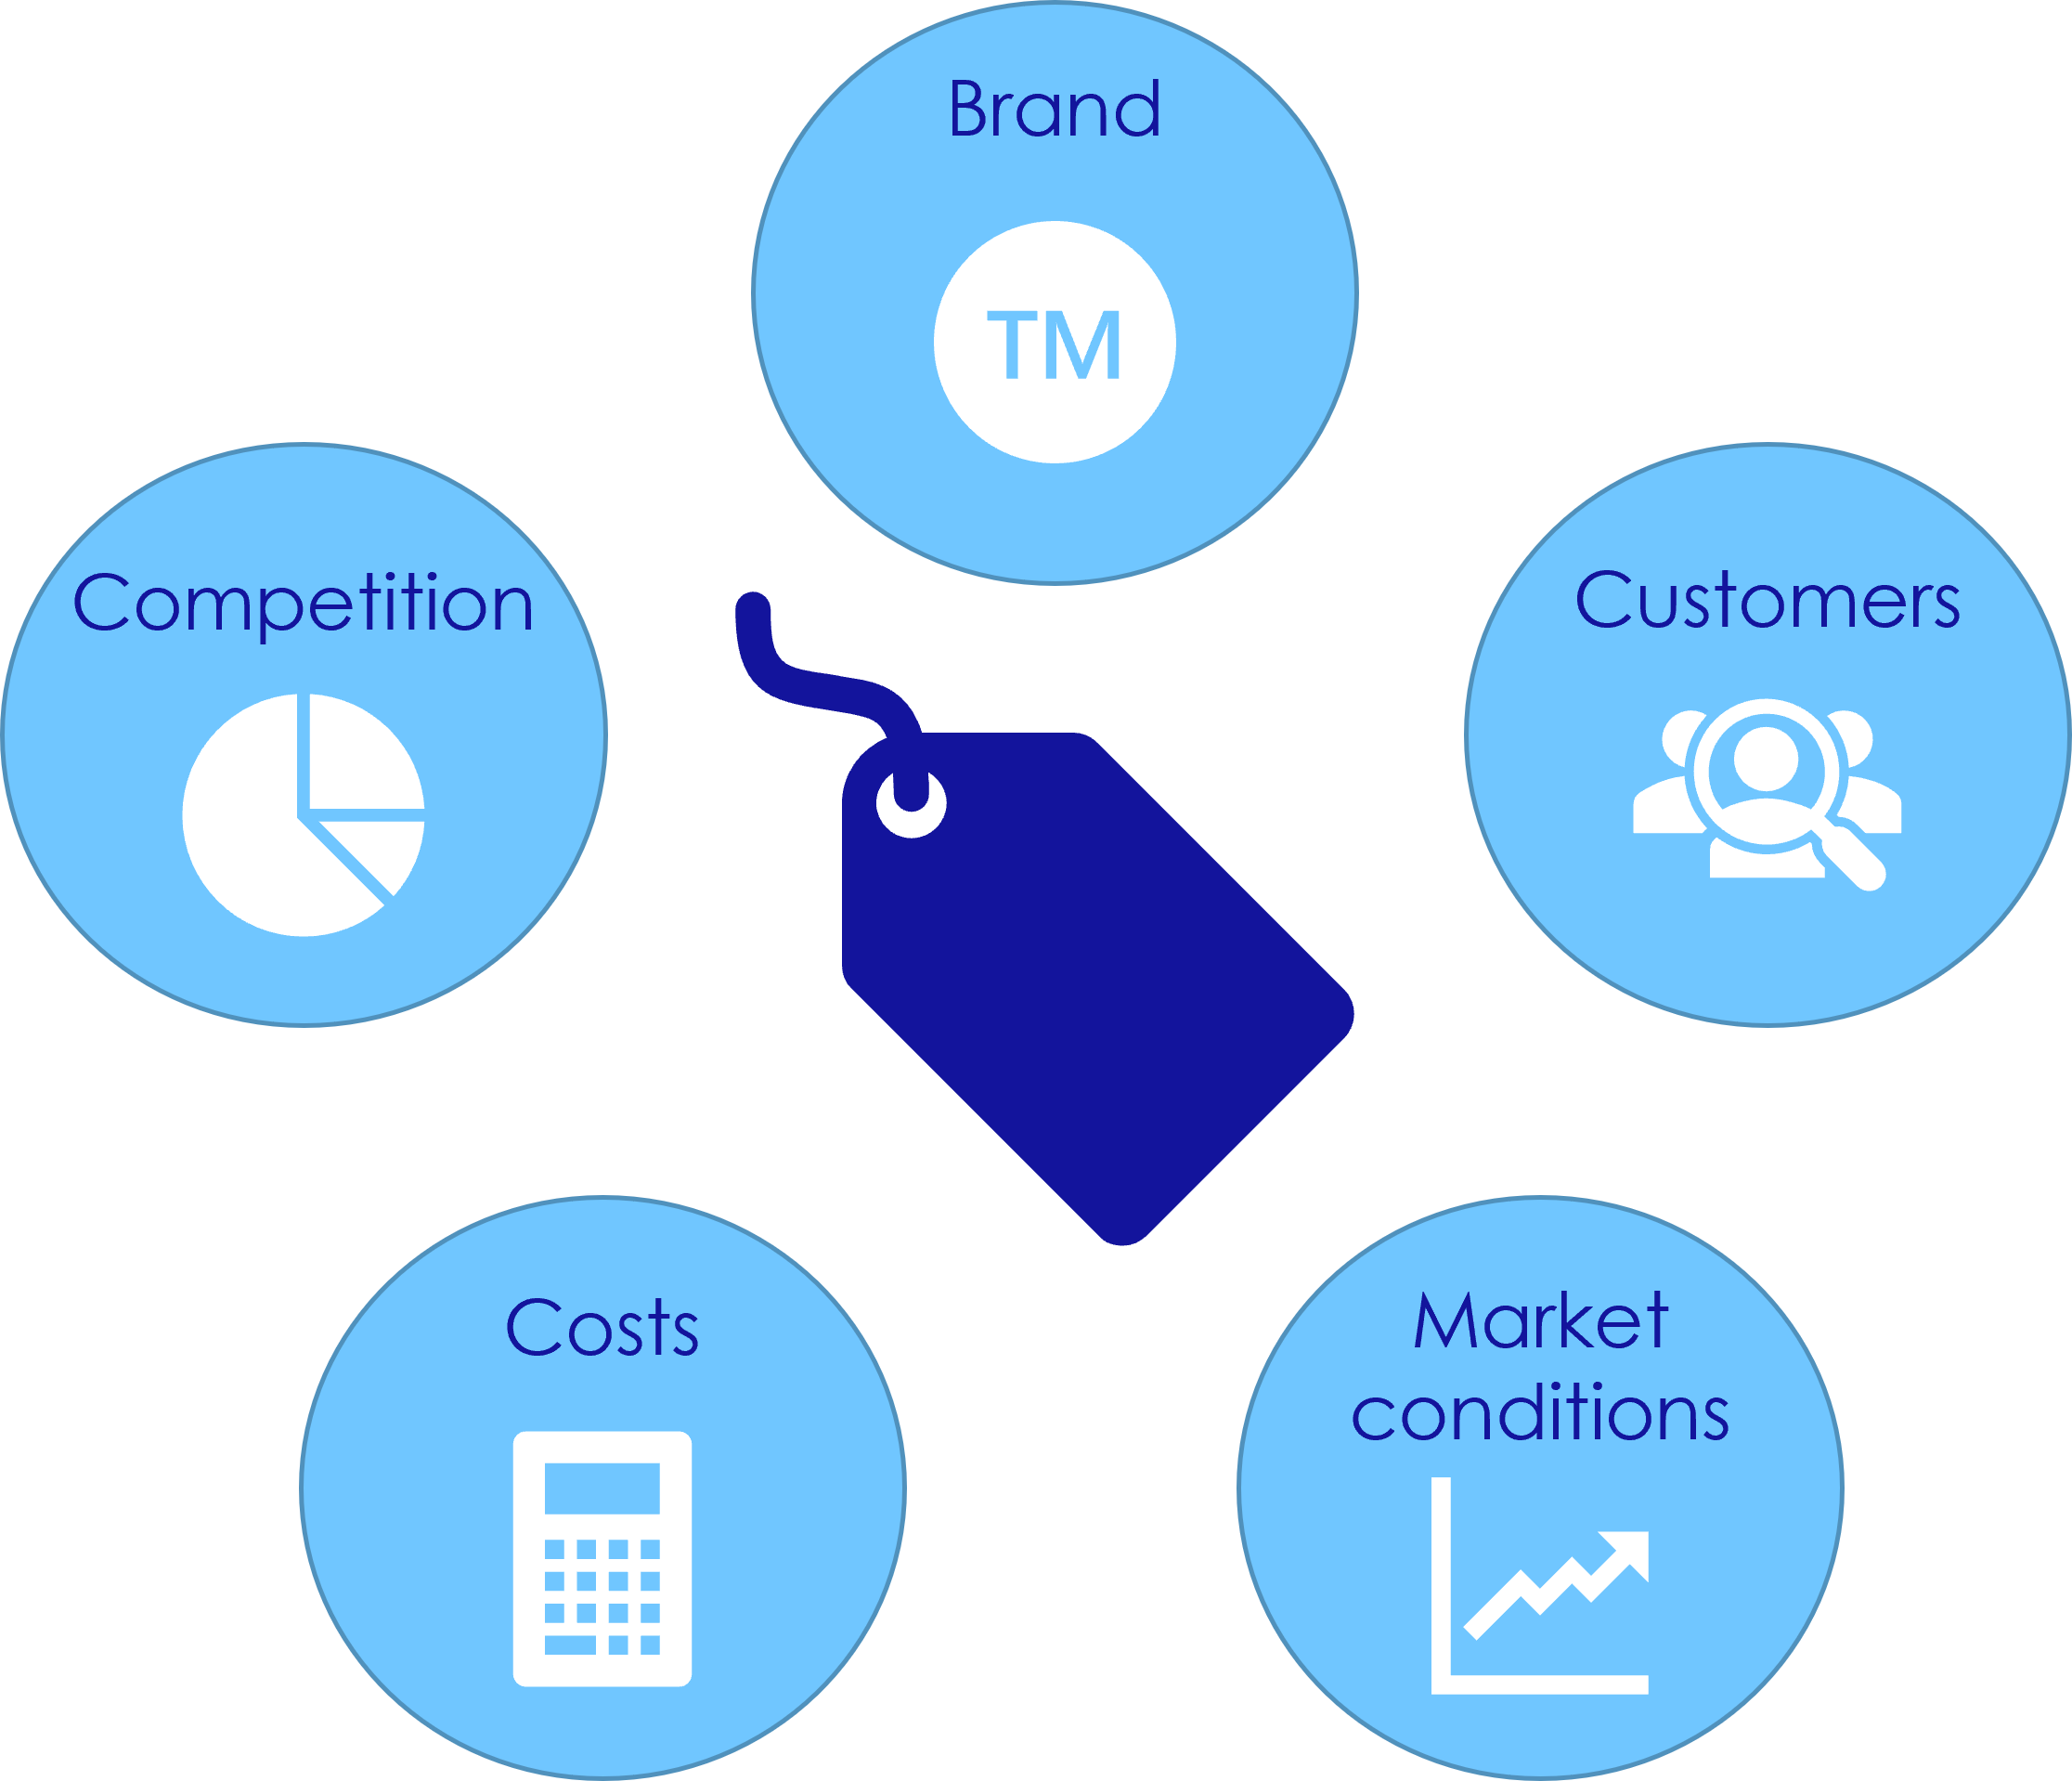 Pricing - Brand - Customers - Market Conditions - Costs - Competition